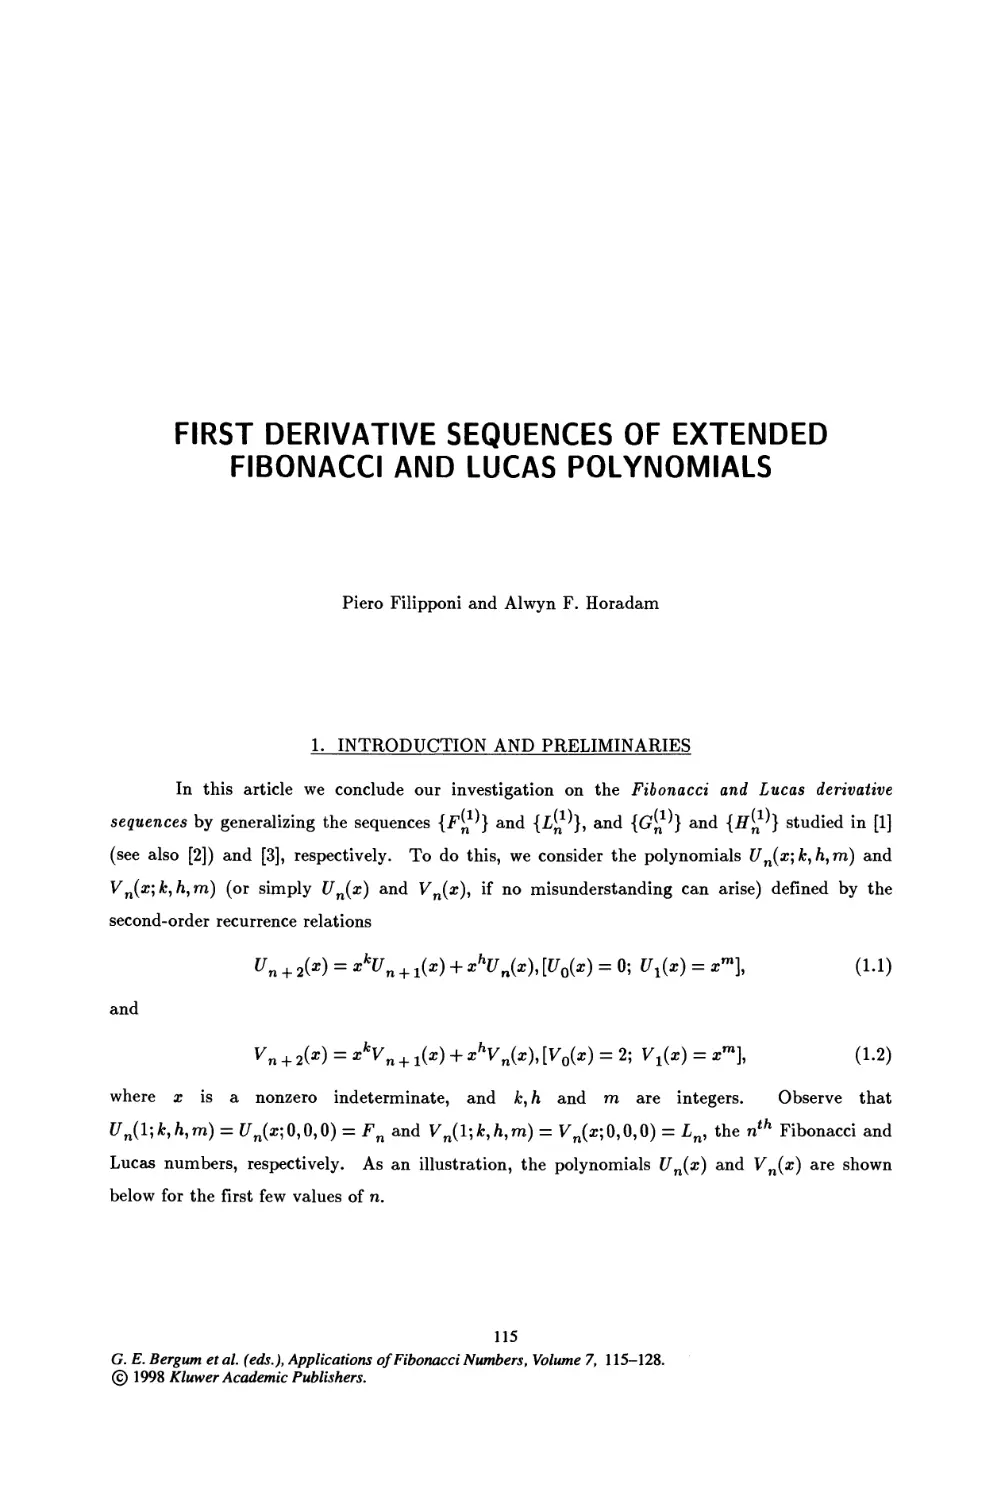 15. First Derivative Sequences of Extended Fibonacci and Lucas Polynomials